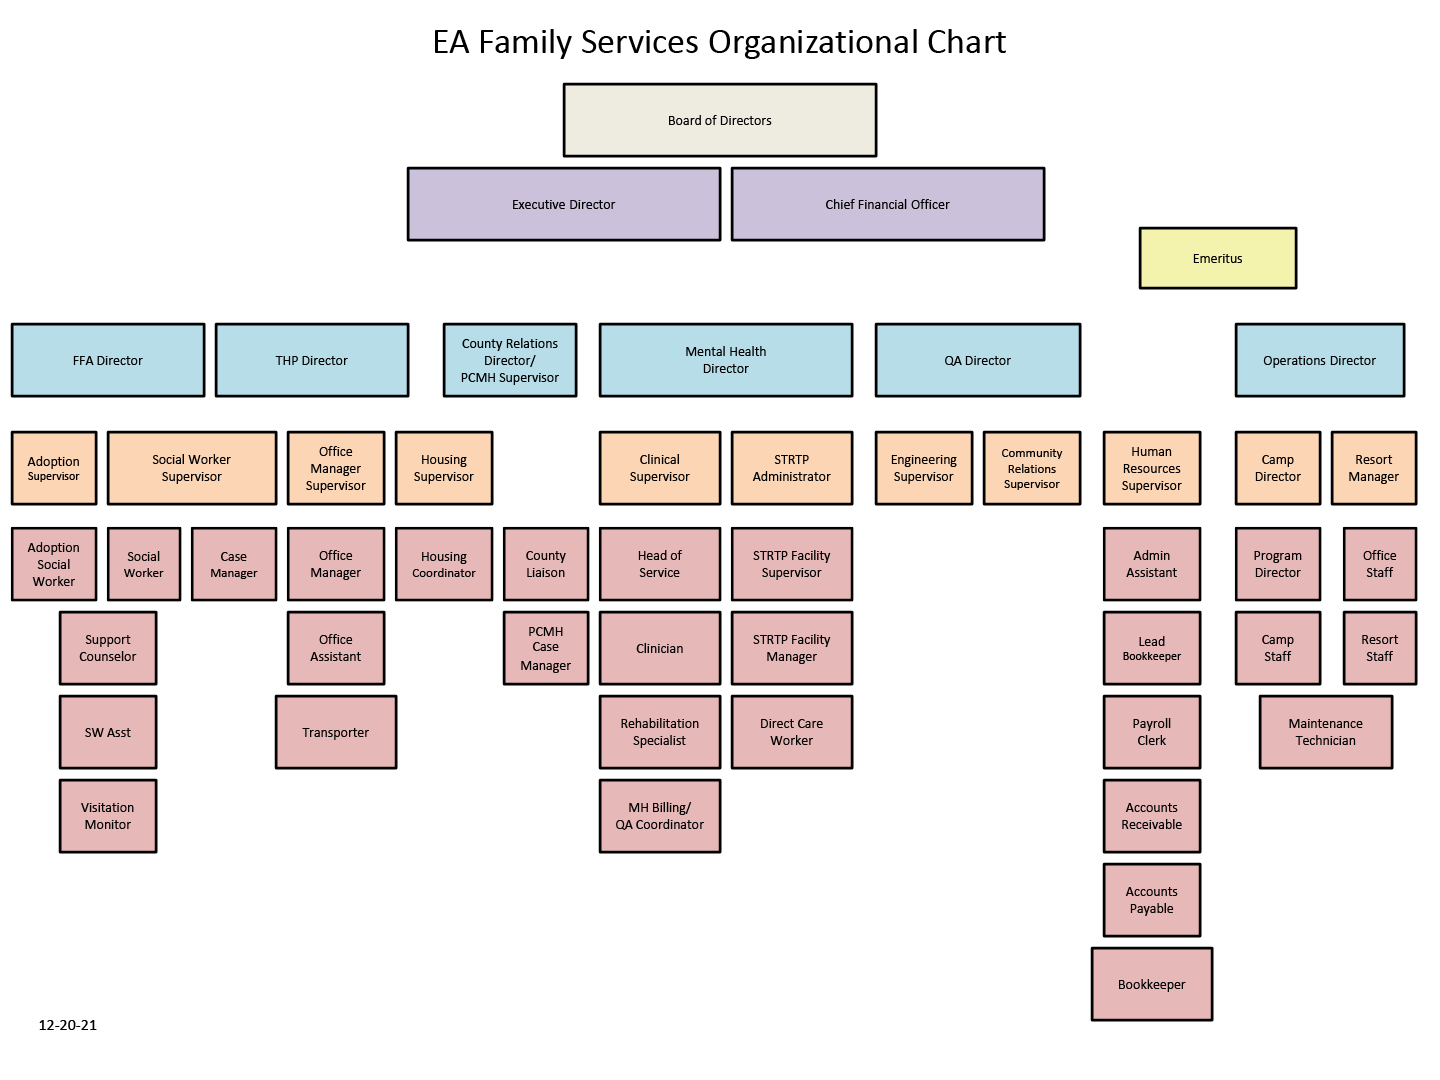 EA Family Services Organizational Chart